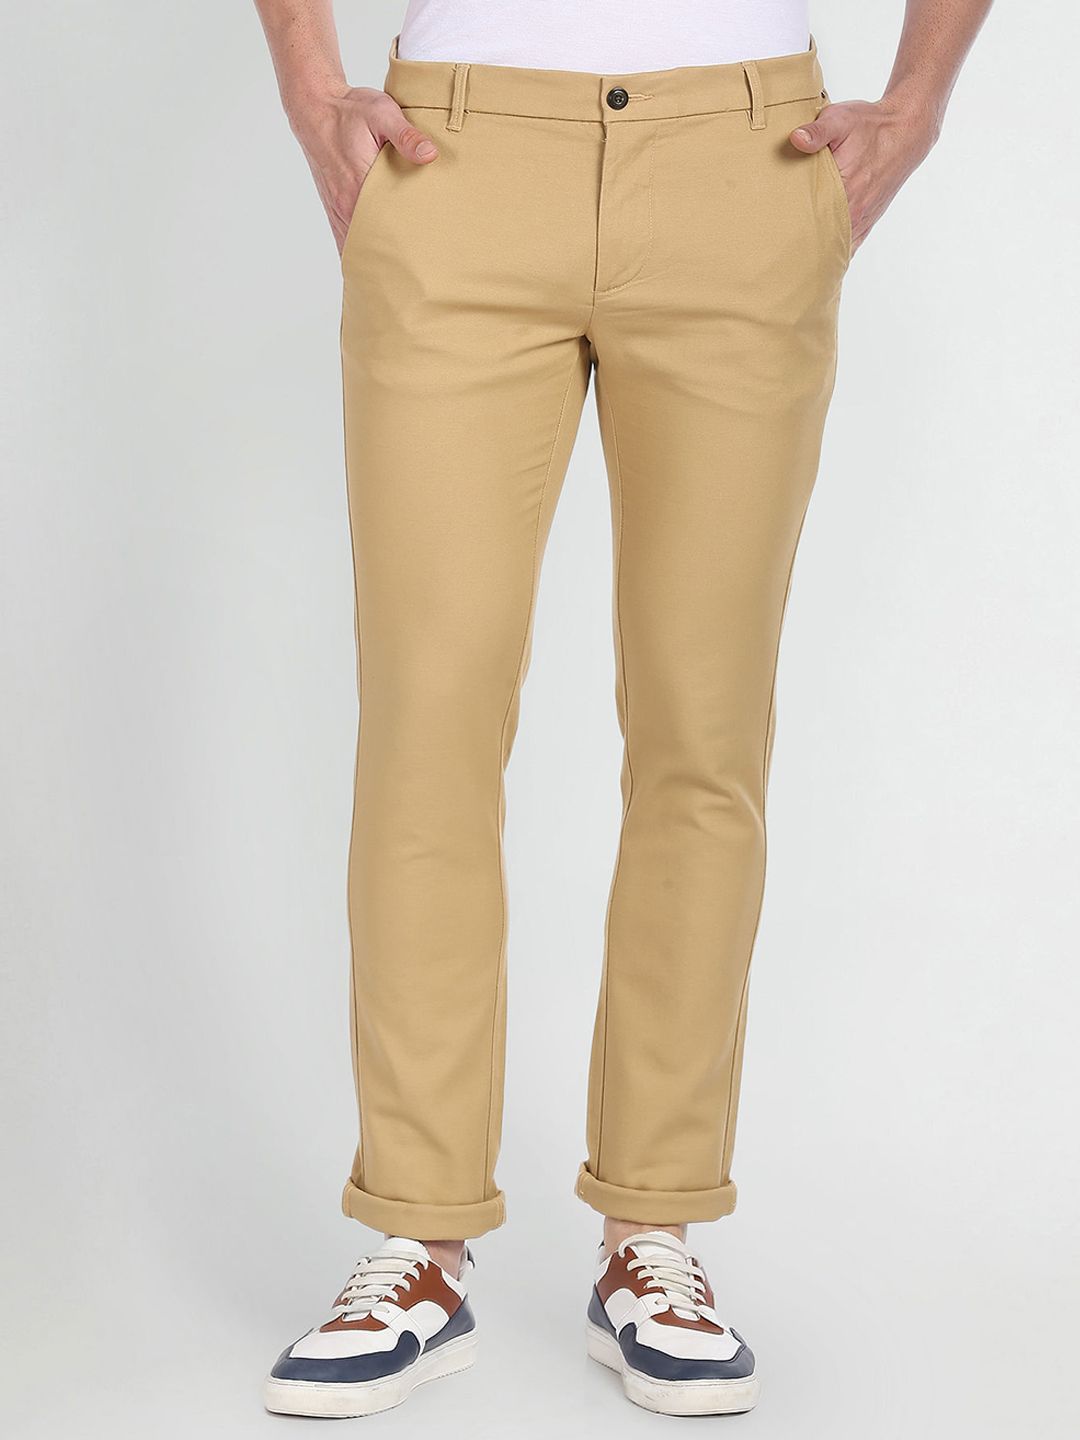 Arrow Mens Cotton Trousers, for Impeccable Finish, Anti Wrinkle, Gender :  Male - Vaibhav Textiles Industries, Ludhiana, Punjab